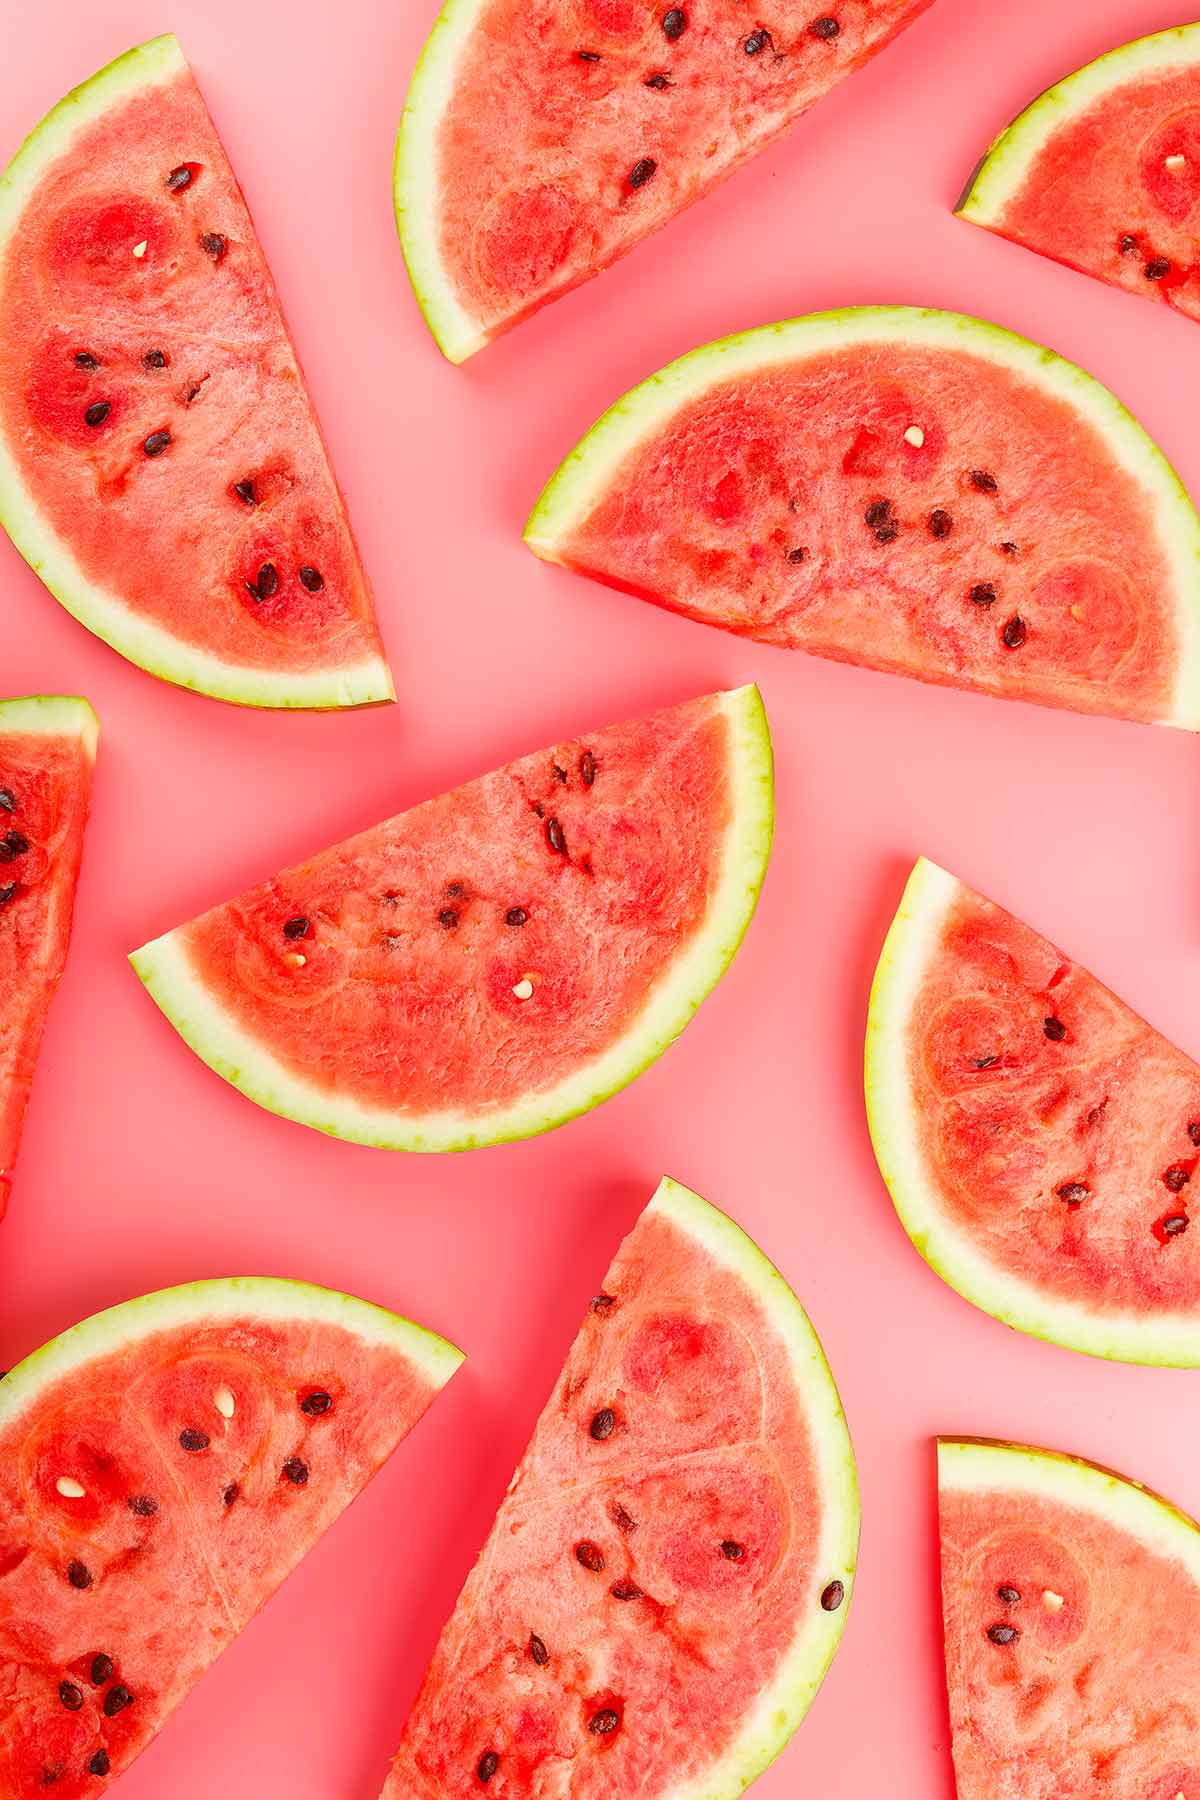 Slices on watermelon on a pink background